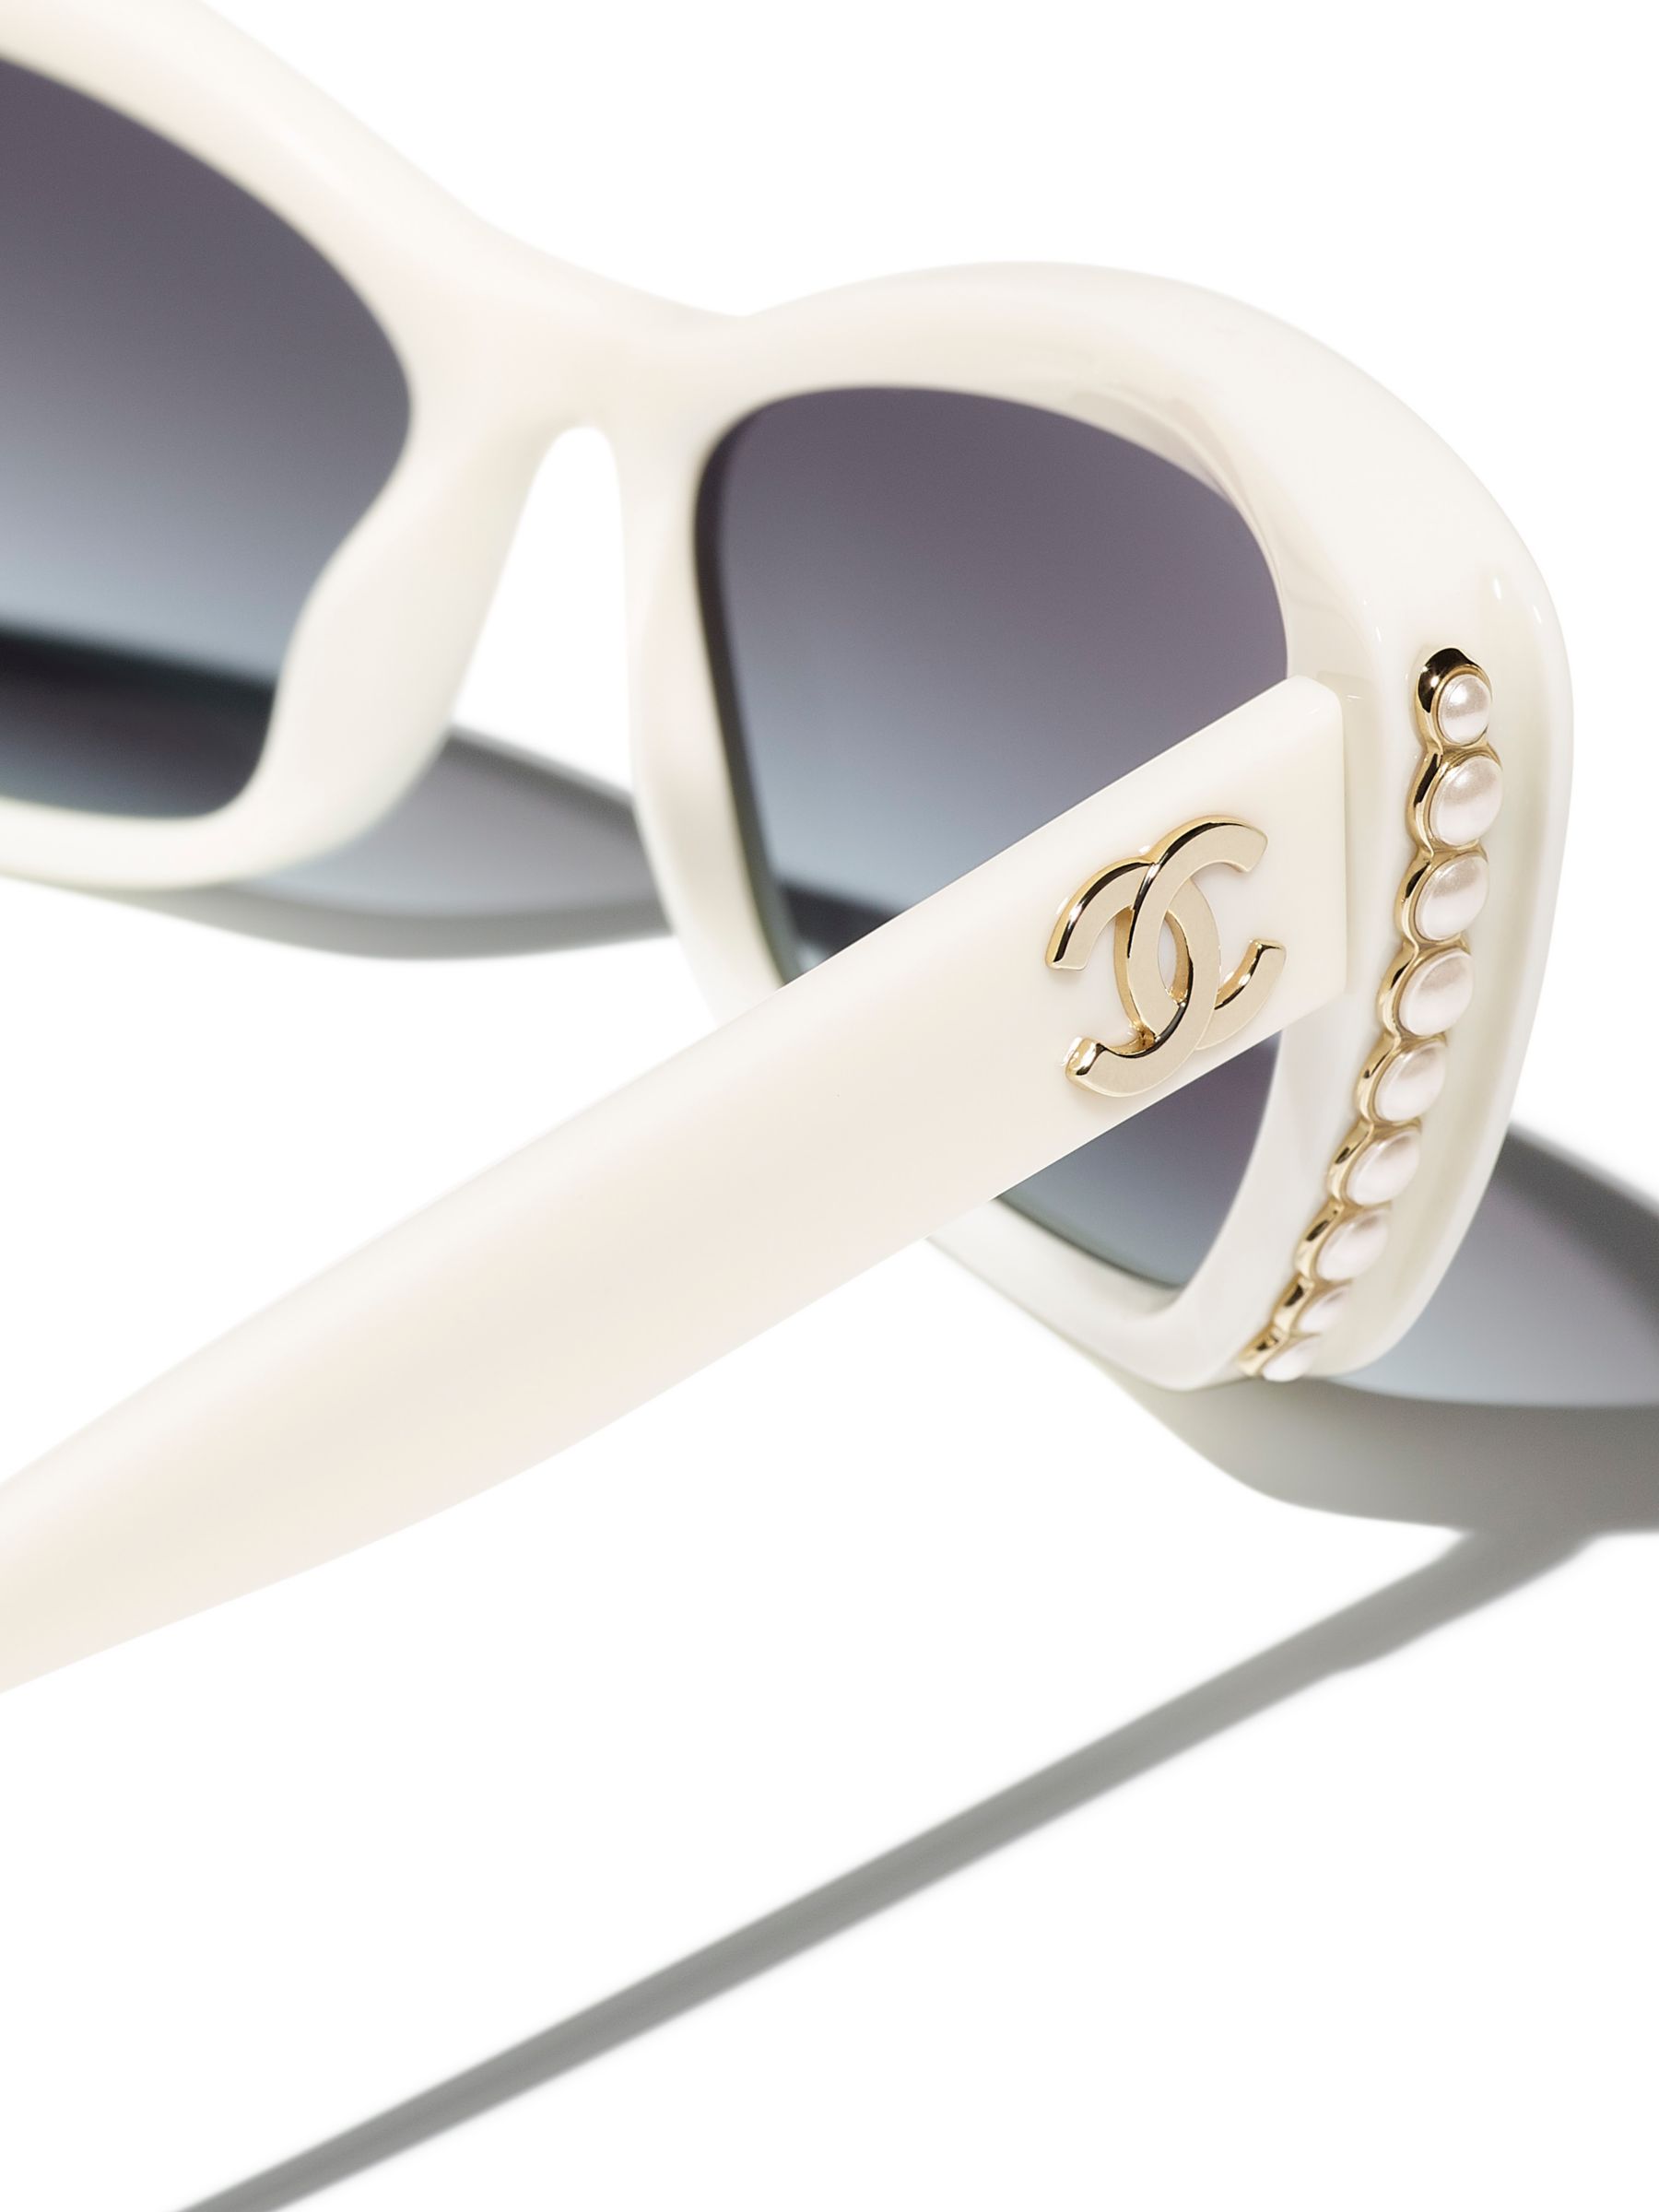 White Butterfly Chanel Sunglasses